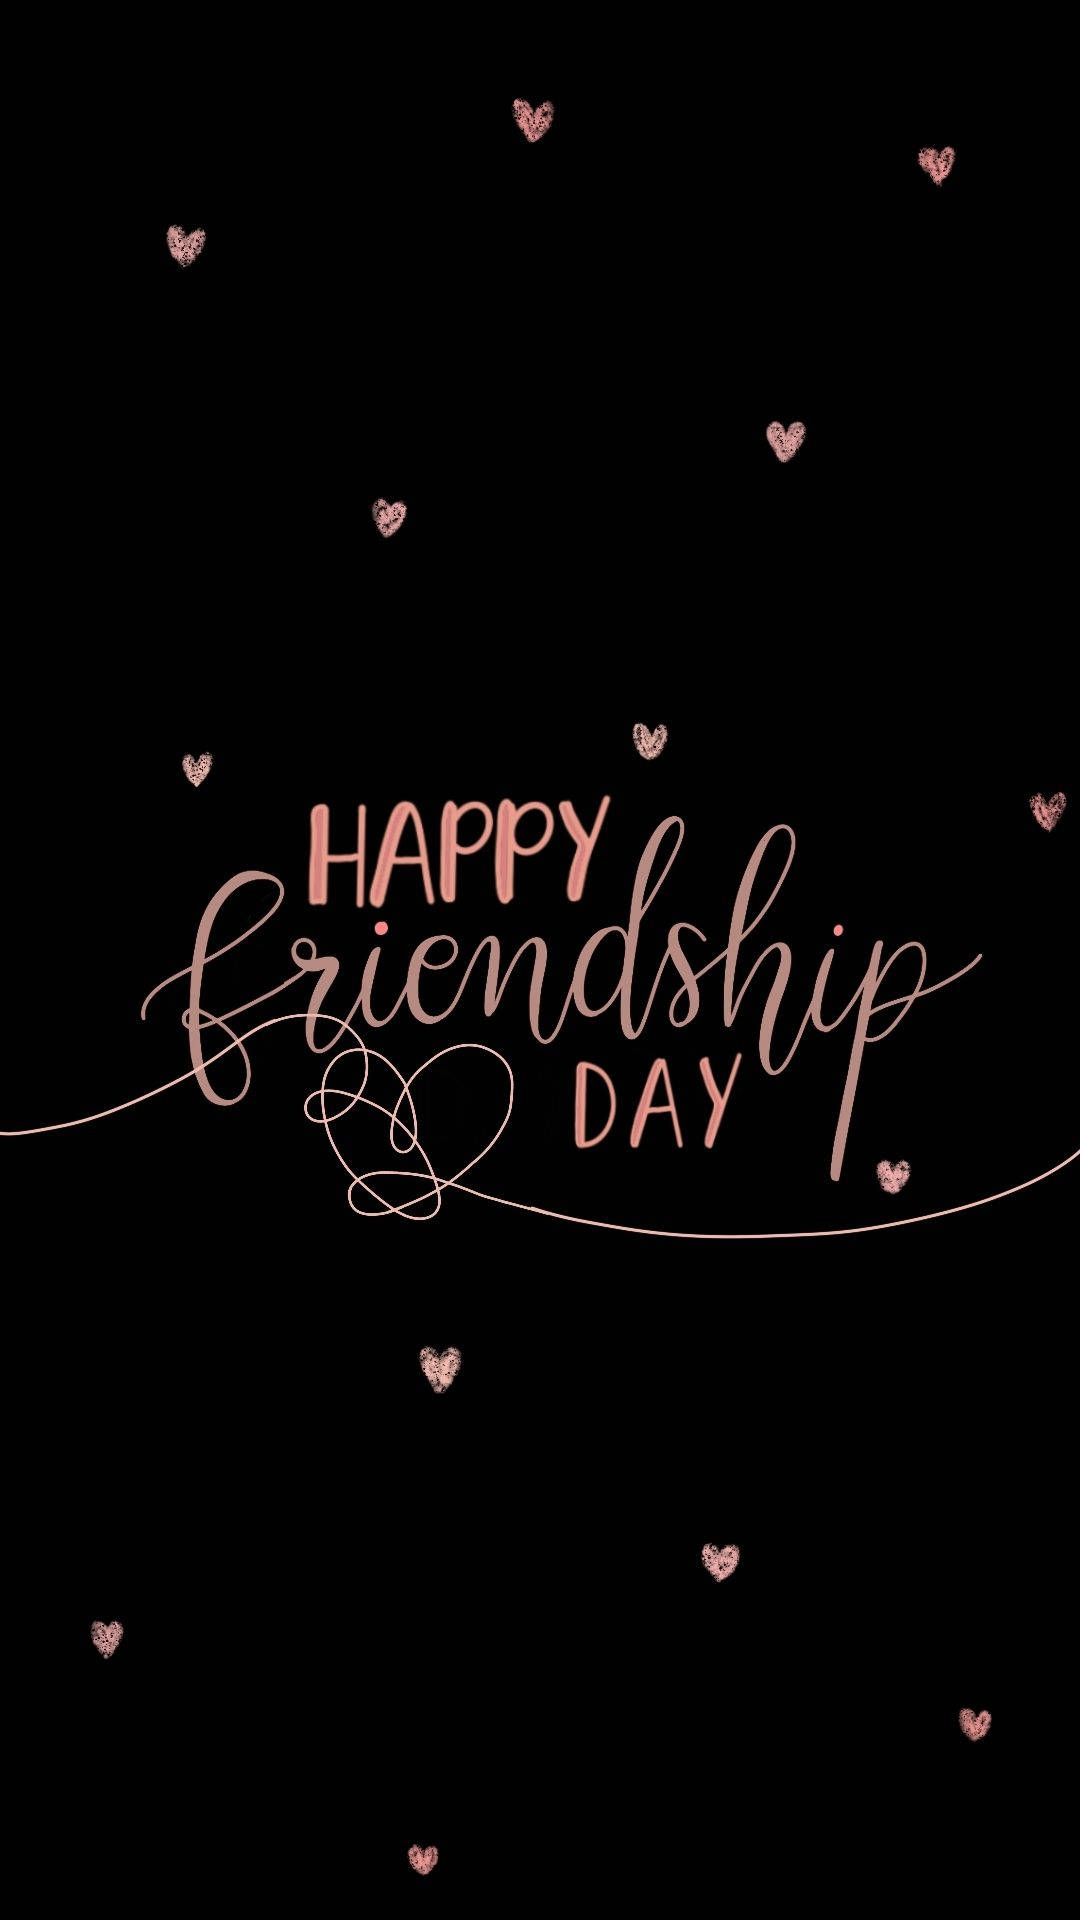 Happy Friendship Day With Hearts Background